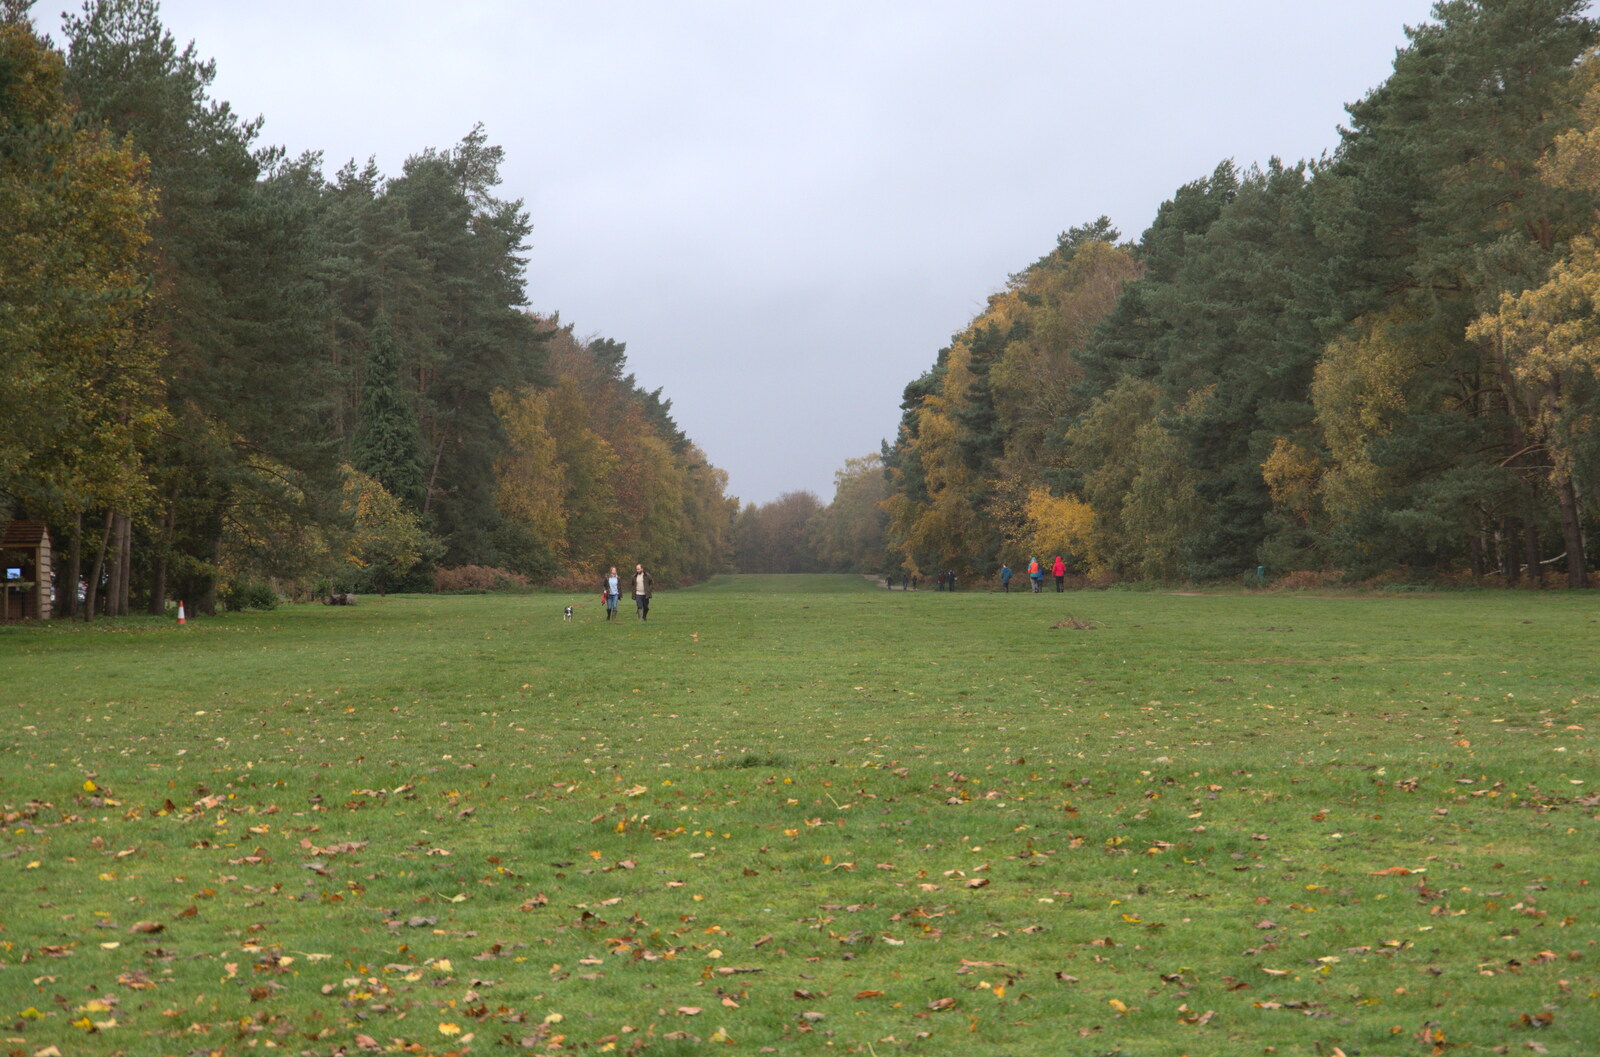 A broad avenue stretches up from the house from A Trip to Sandringham Estate, Norfolk - 31st October 2020